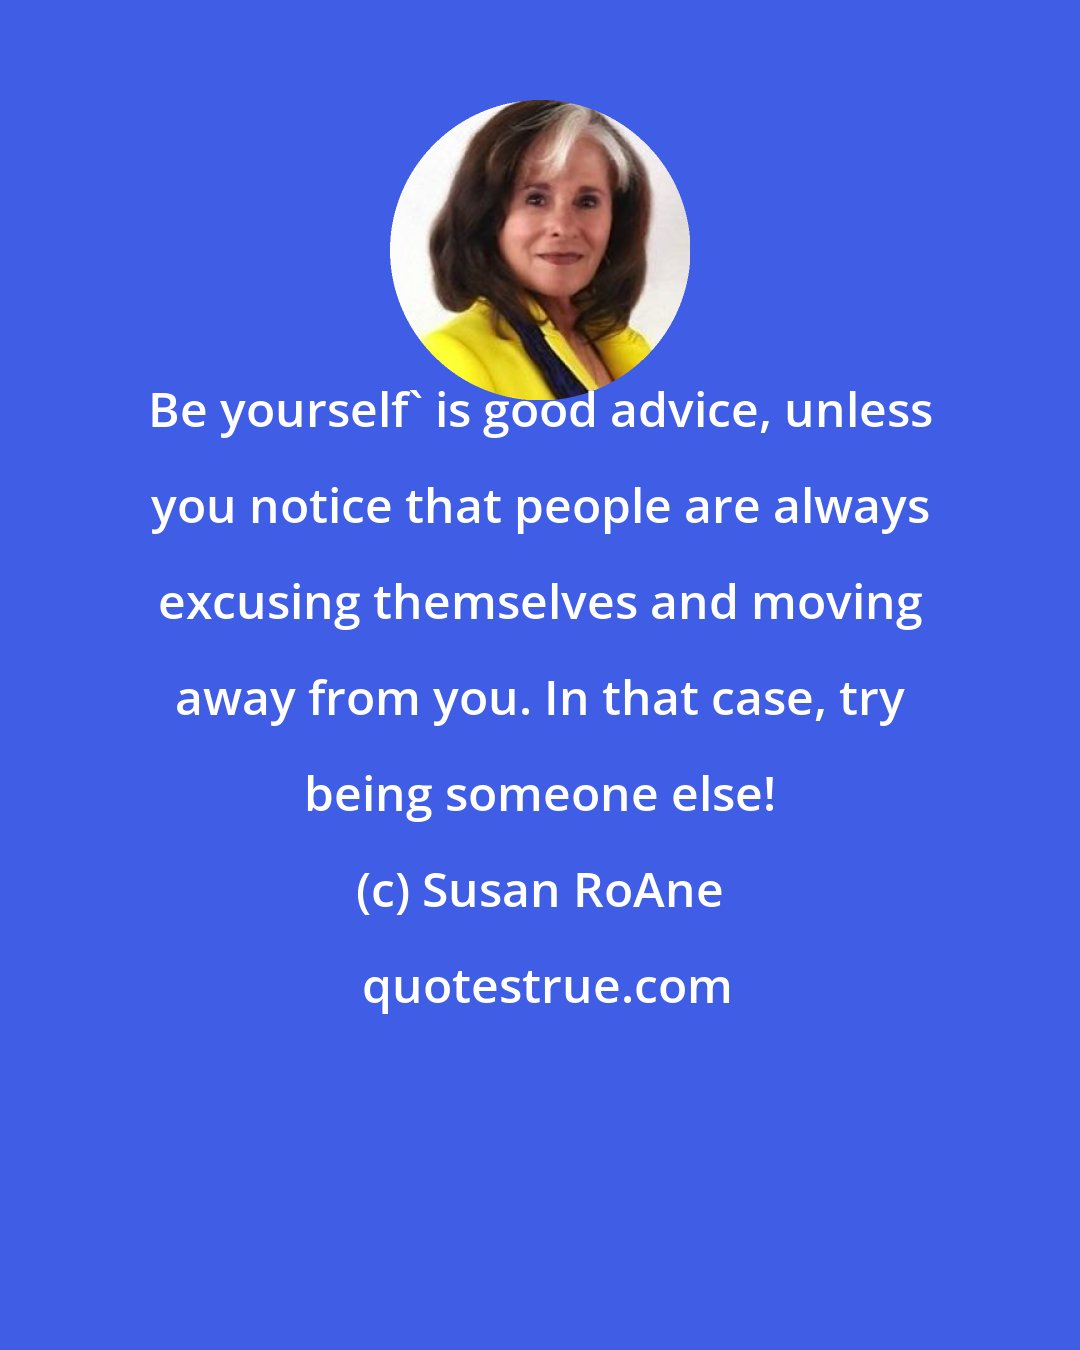 Susan RoAne: Be yourself' is good advice, unless you notice that people are always excusing themselves and moving away from you. In that case, try being someone else!